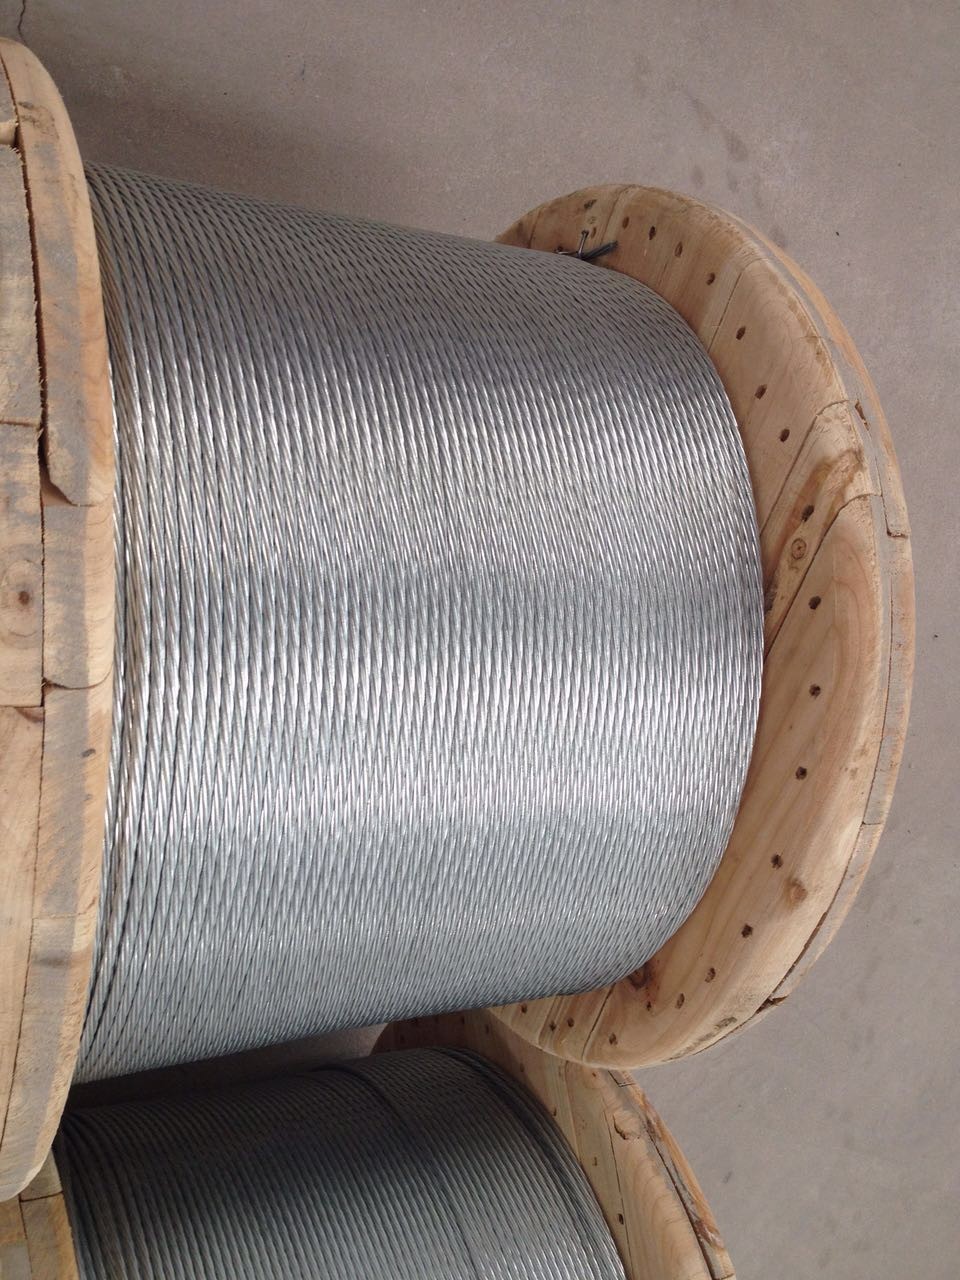  ASTM A 475 Galvanized Stranded Steel Wire For Overhead Fiber Optic Cable Manufactures